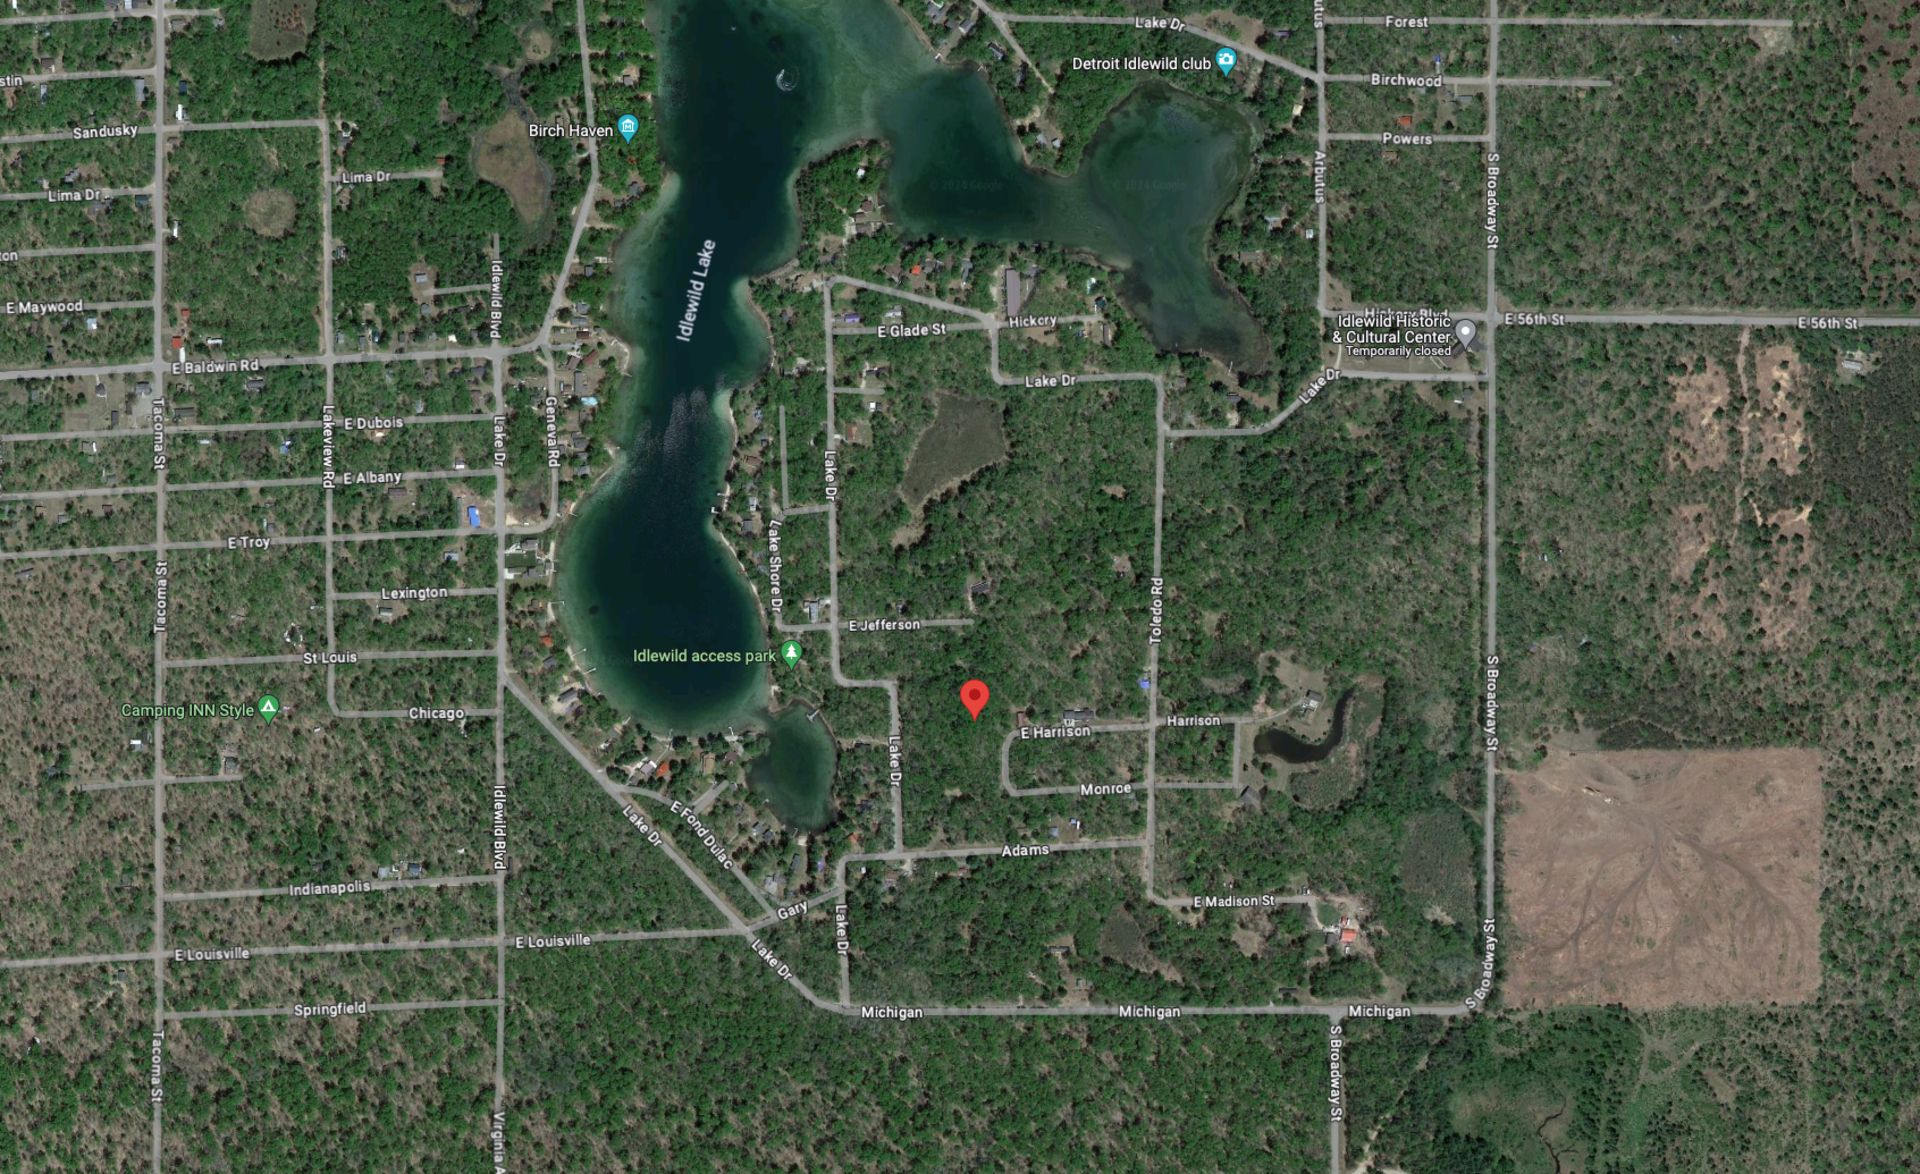 Own Land in Lake County, Michigan - the "Home of Over 100 Lakes"! - Image 12 of 13